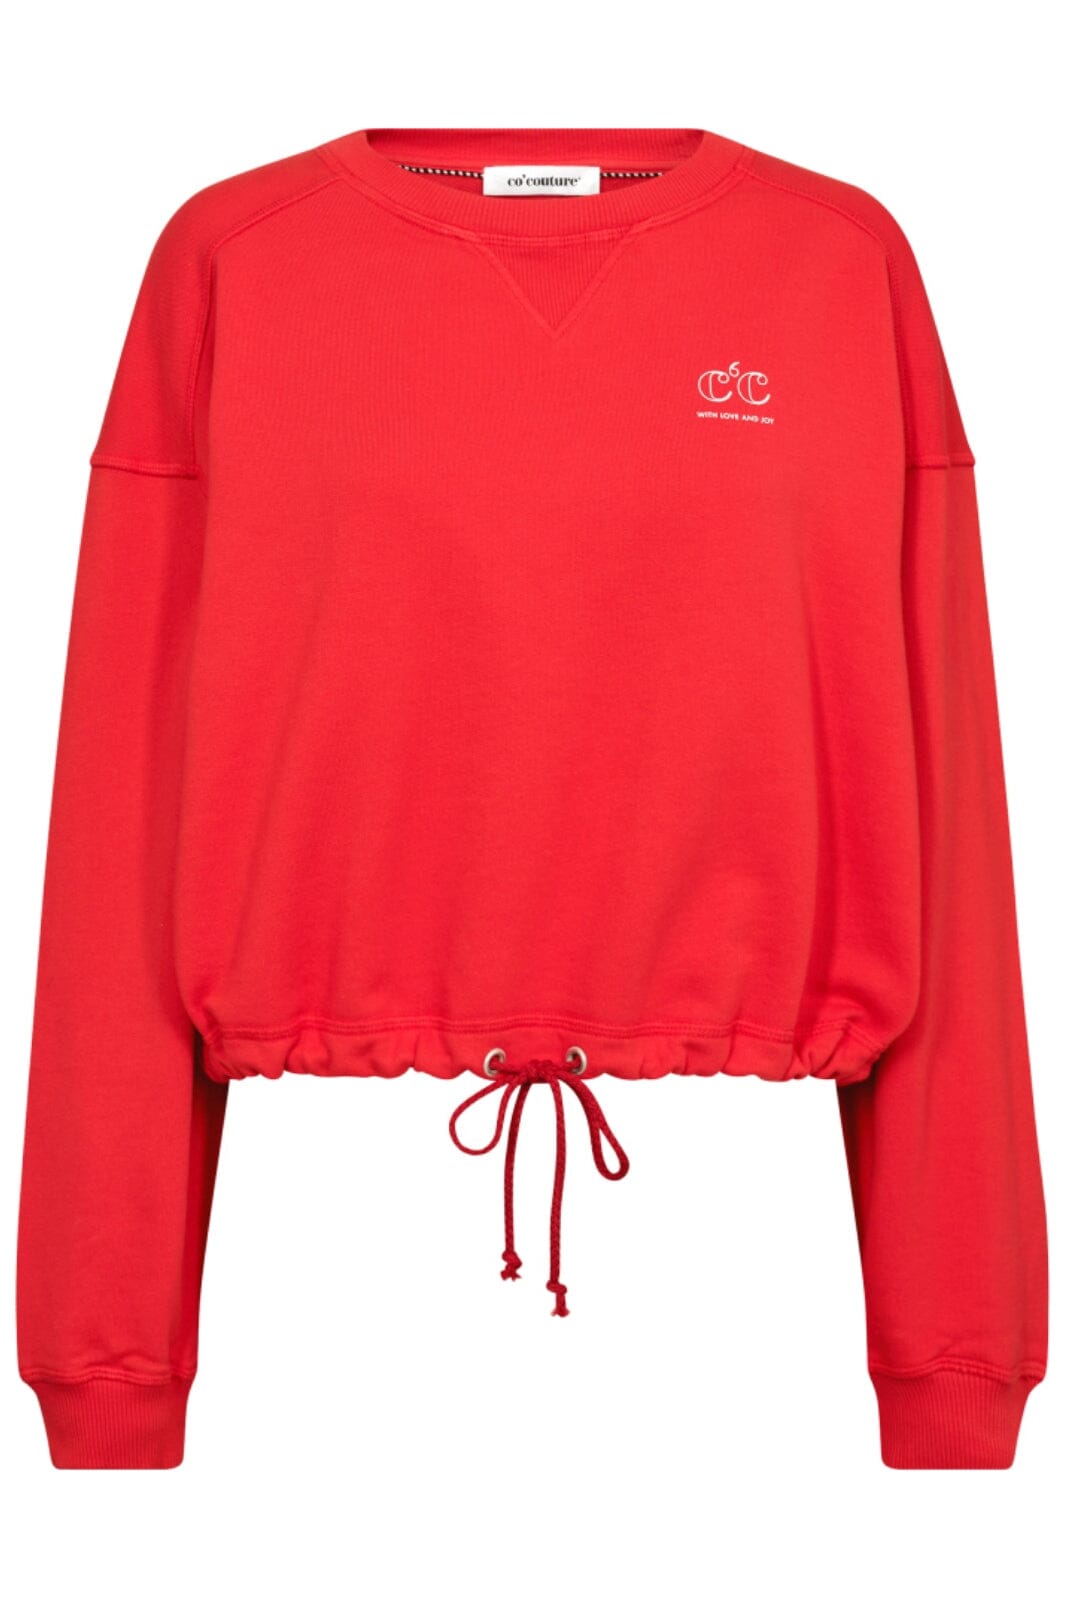 Co´couture - Cleancc Crop Tie Sweat 37018 - 66 Flame Sweatshirts 